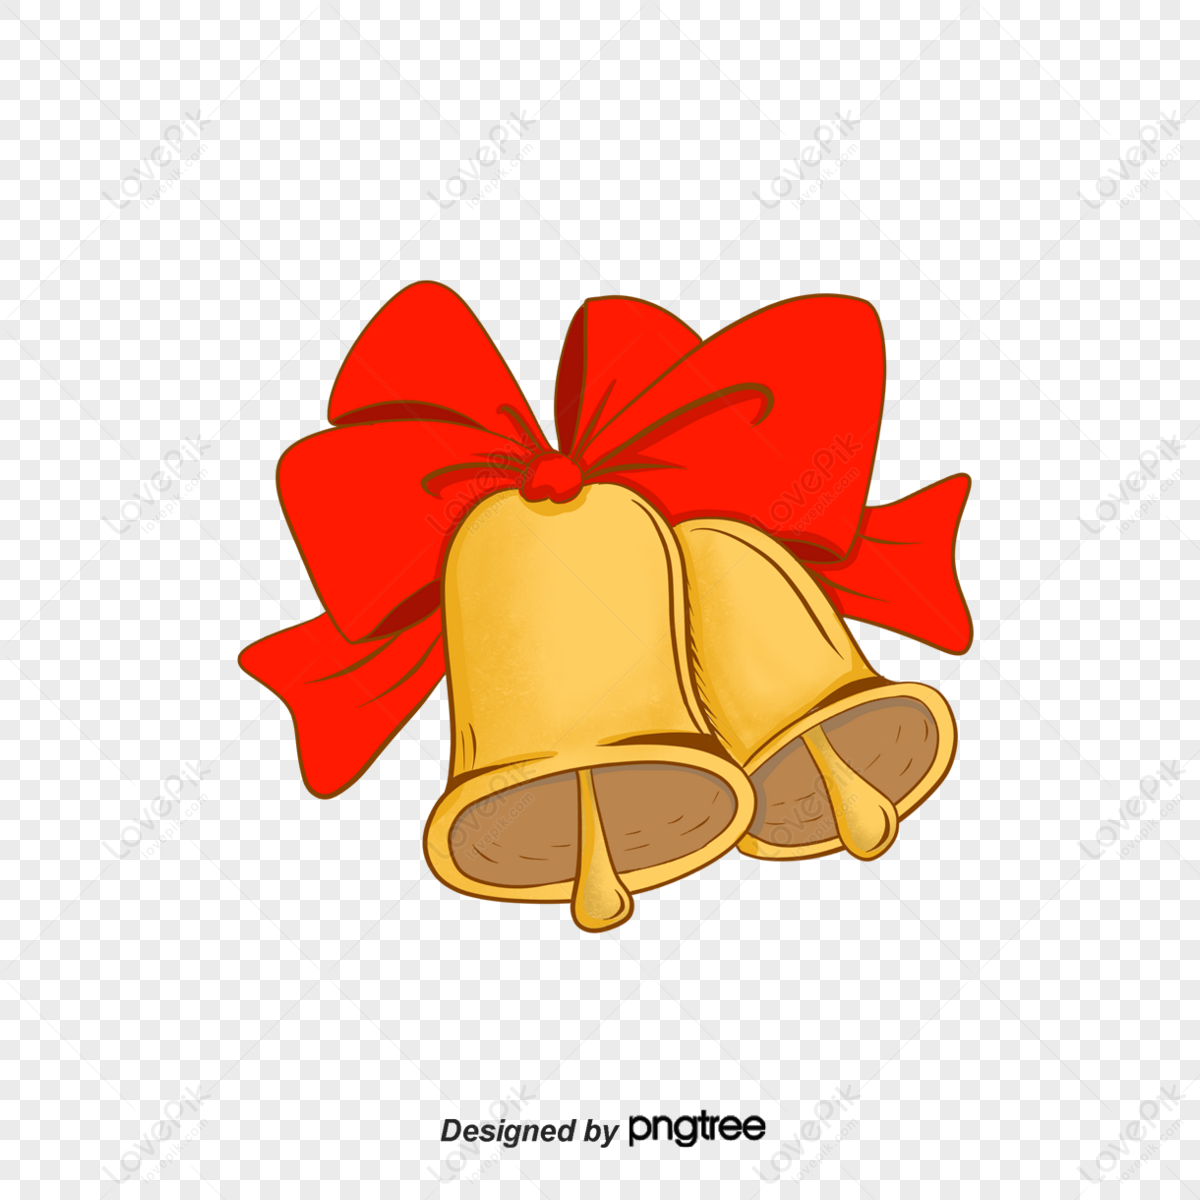 Christmas Poster Vector PNG Images With Transparent Background | Free ...